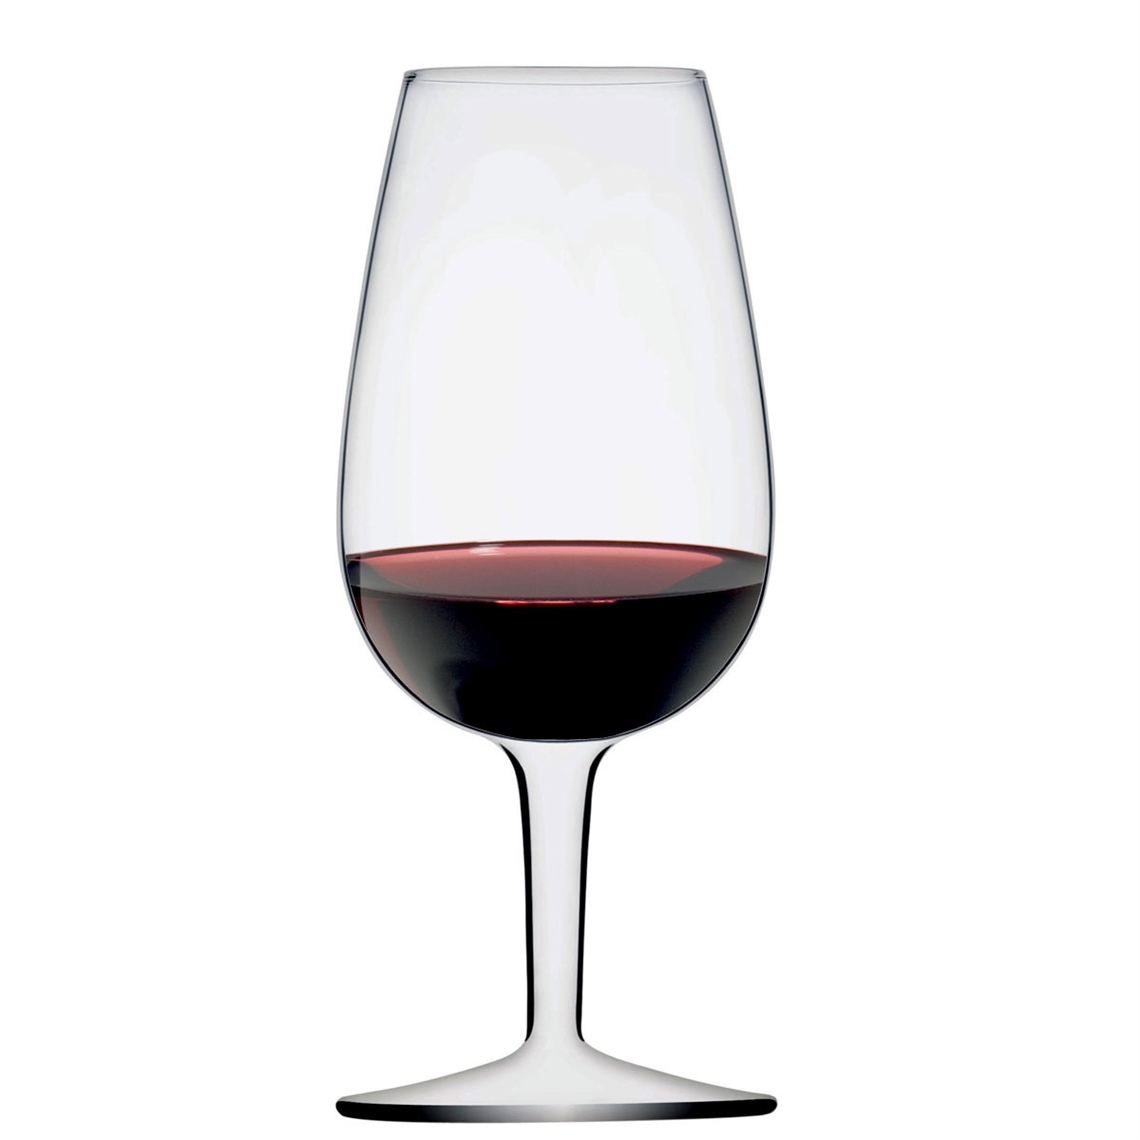 View more branded sommelier aprons from our Wine Tasting Glasses range